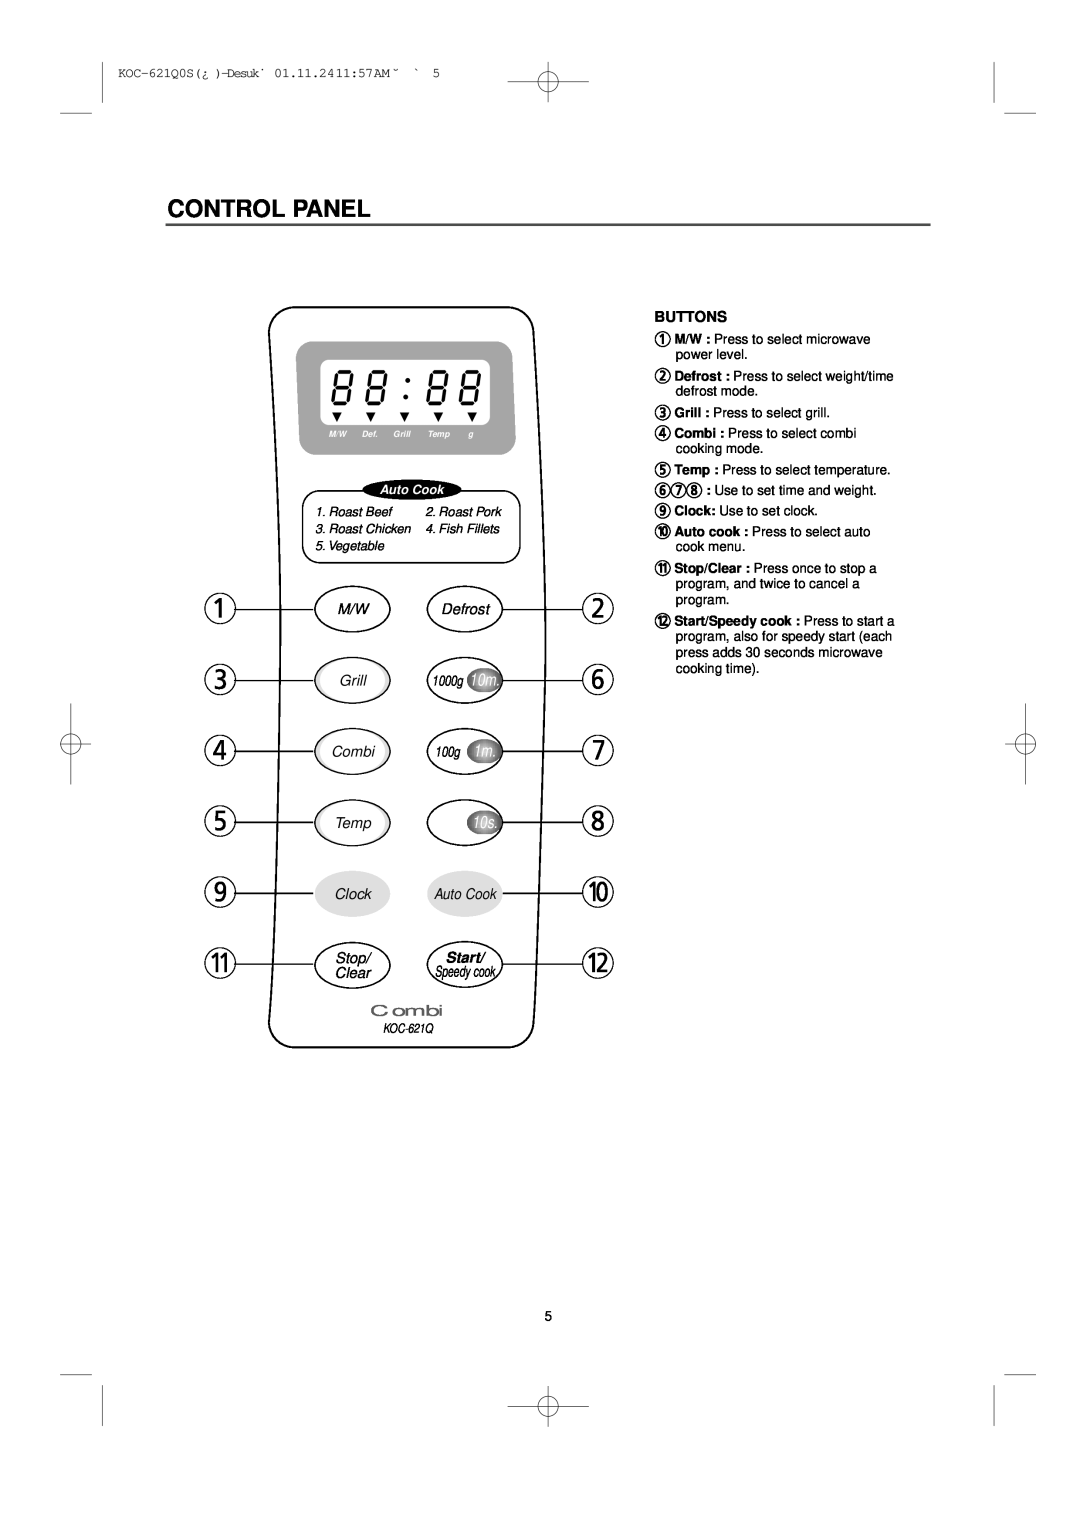 Daewoo KOC-621Q owner manual Control Panel, Combi, Stop, Buttons, Defrost, Grill, 100g 1m, Temp, Clock, Start, Clear 